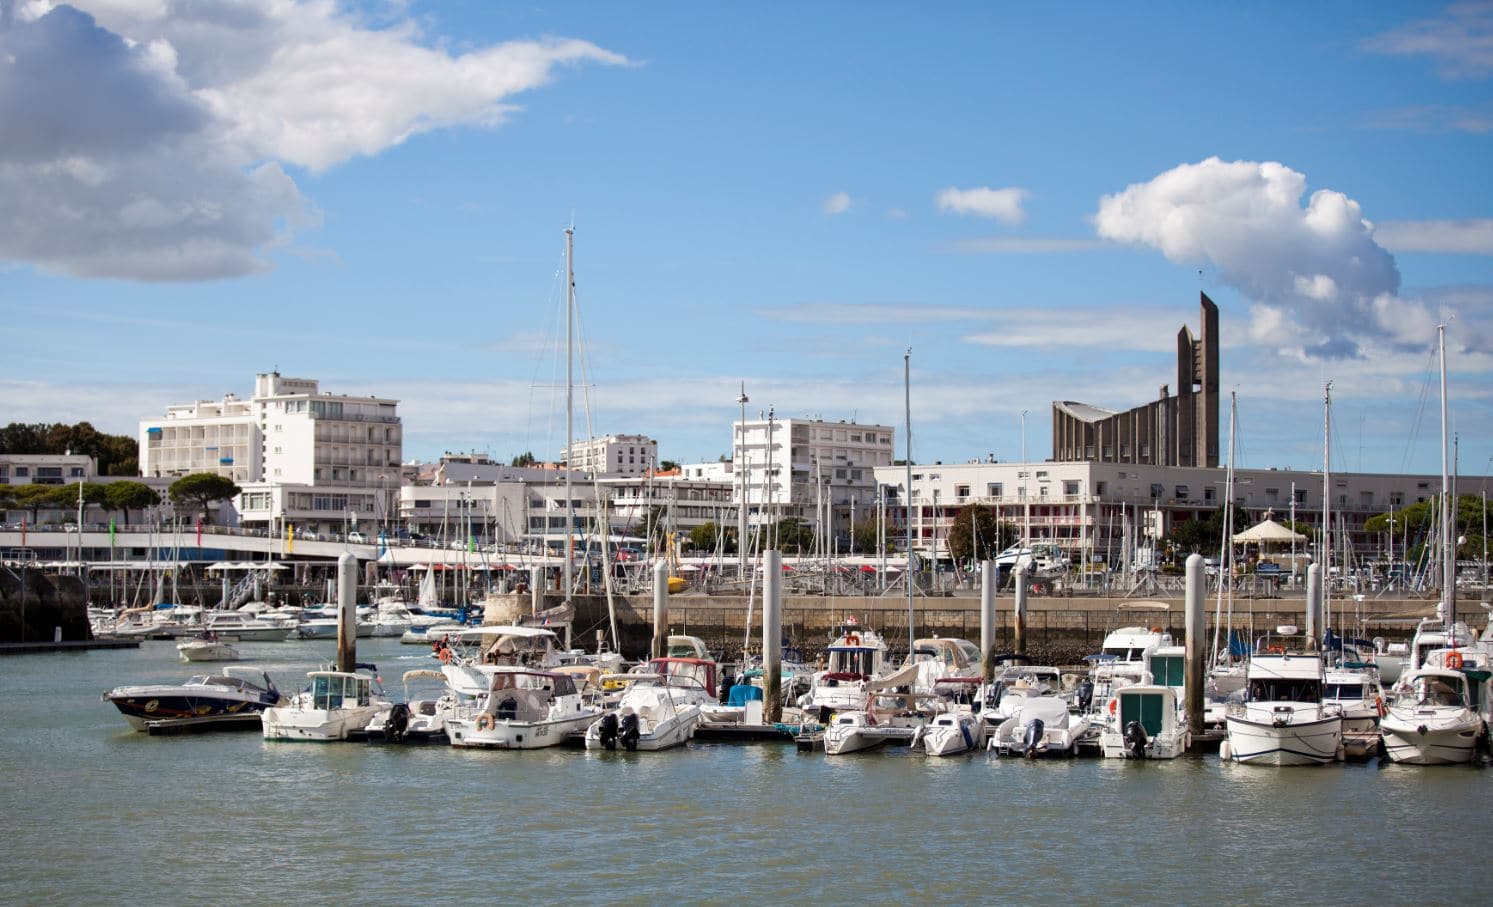 The harbour and the modernist church of Royan